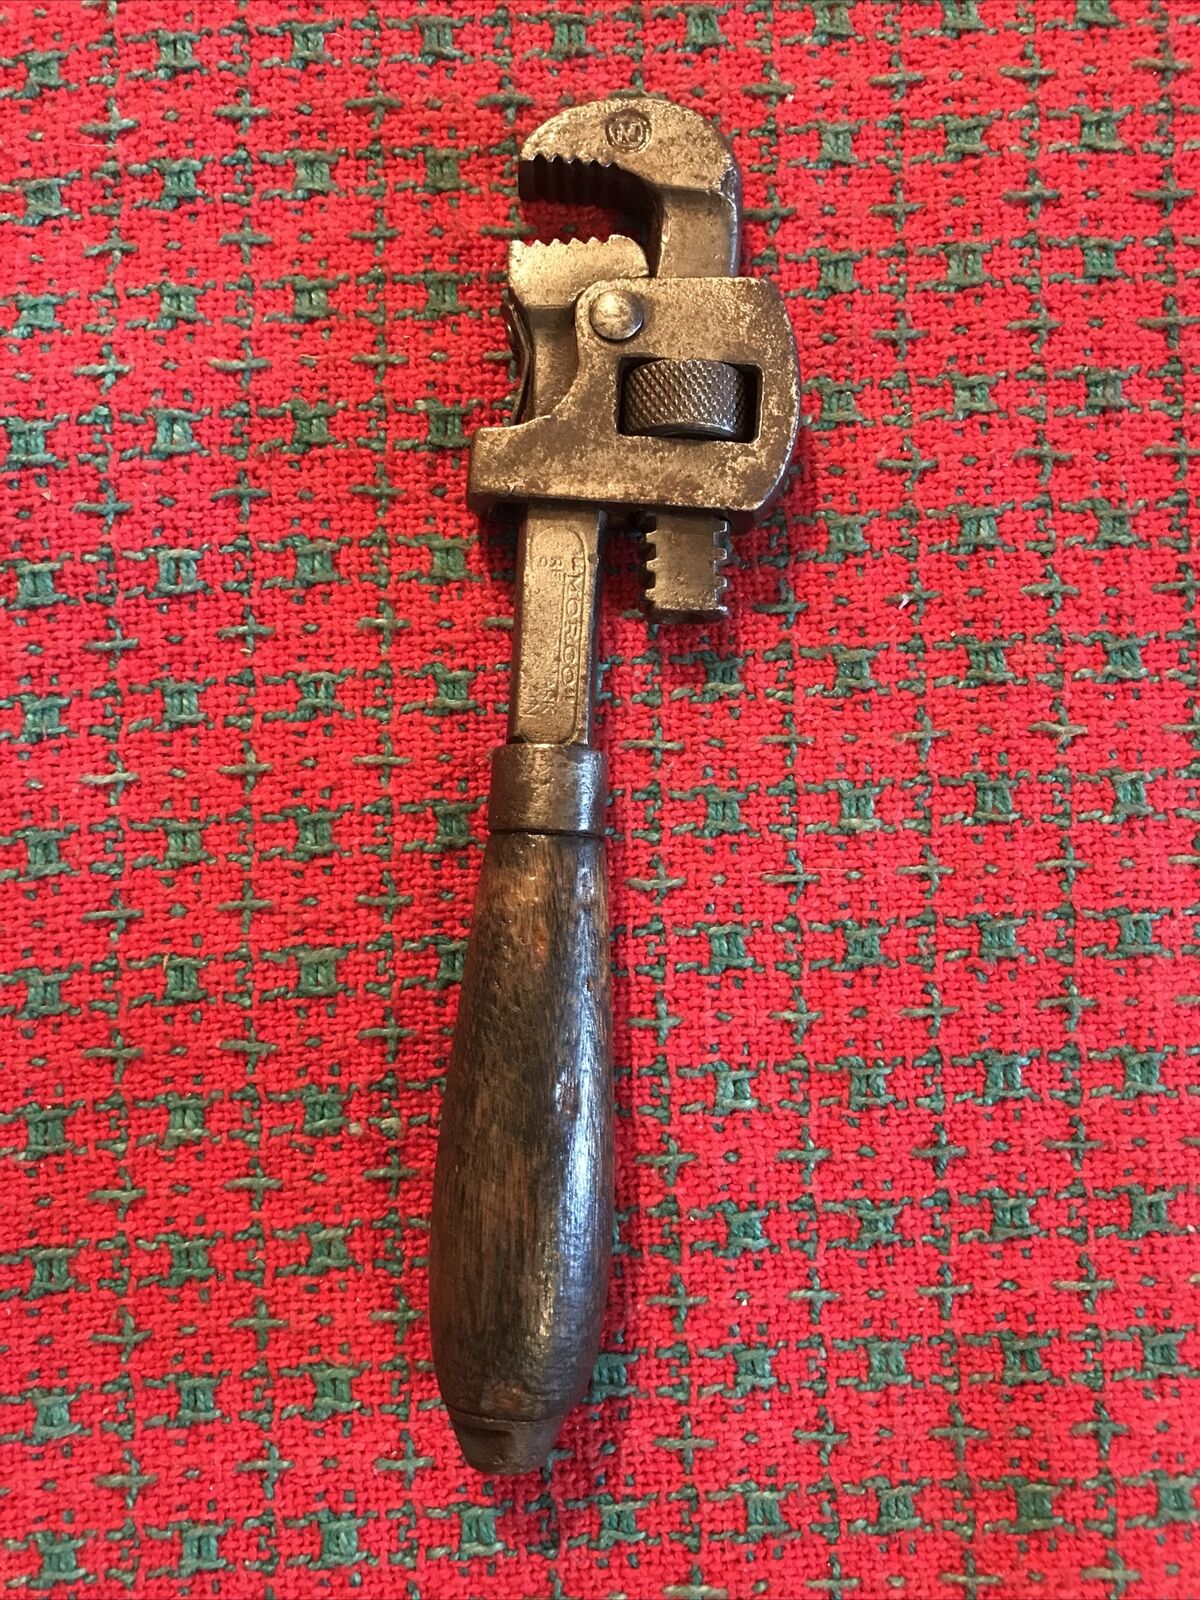 Vintage Stillson Pipe Wrench 6” Rare Morco Stamp Moore Drop Forging, Mass. Usa